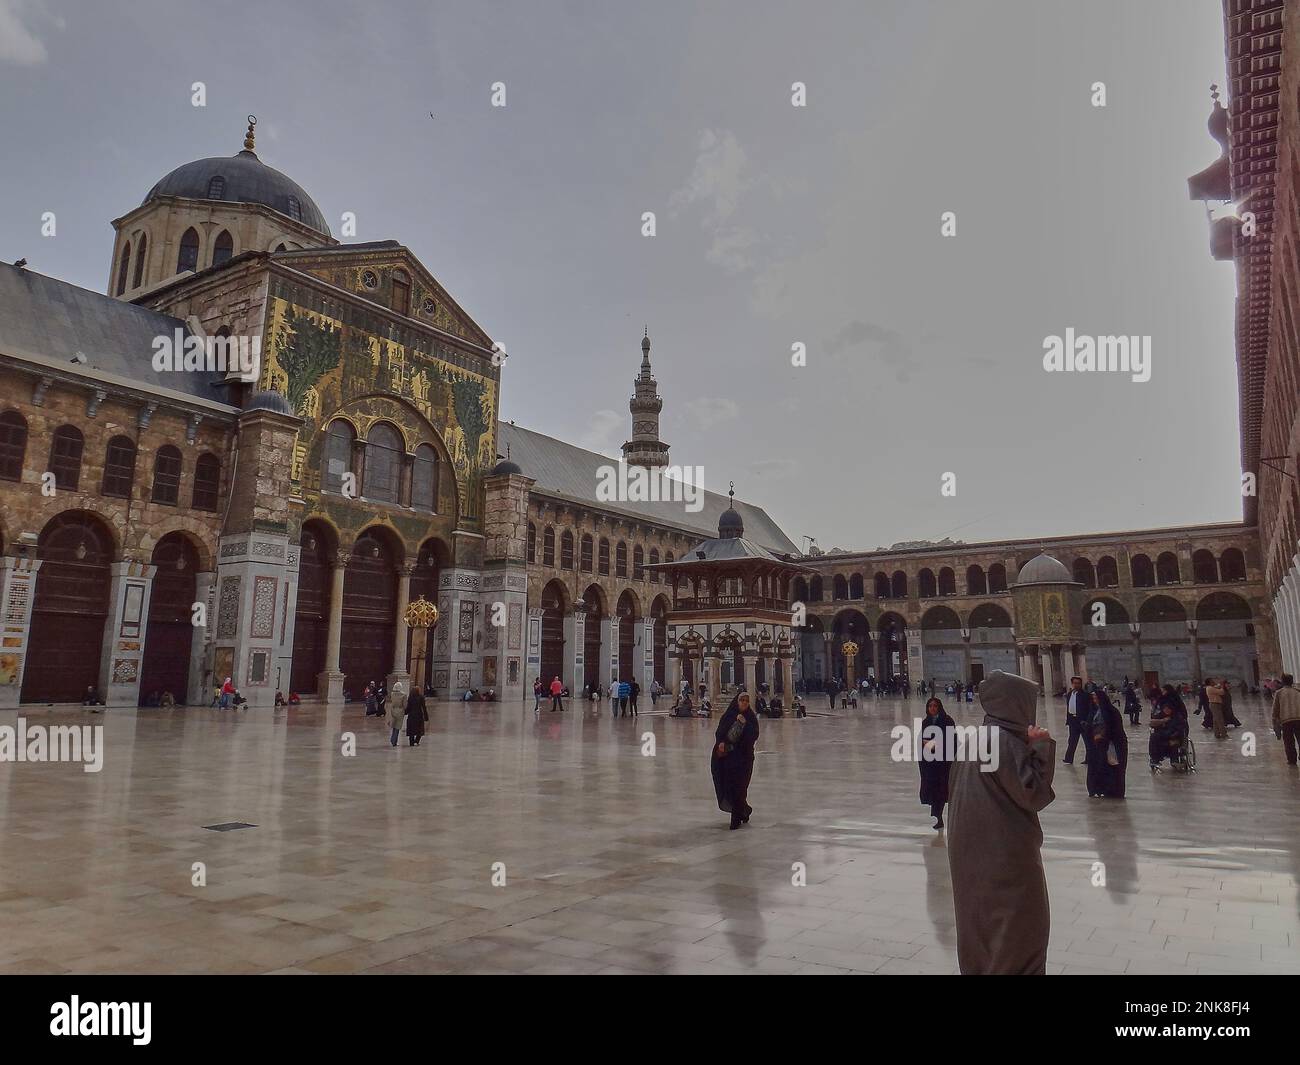 Damascus, Syria - 04 16 2011: exterior of the omayyad mosque in the city center of Damascus in Syria. Stock Photo